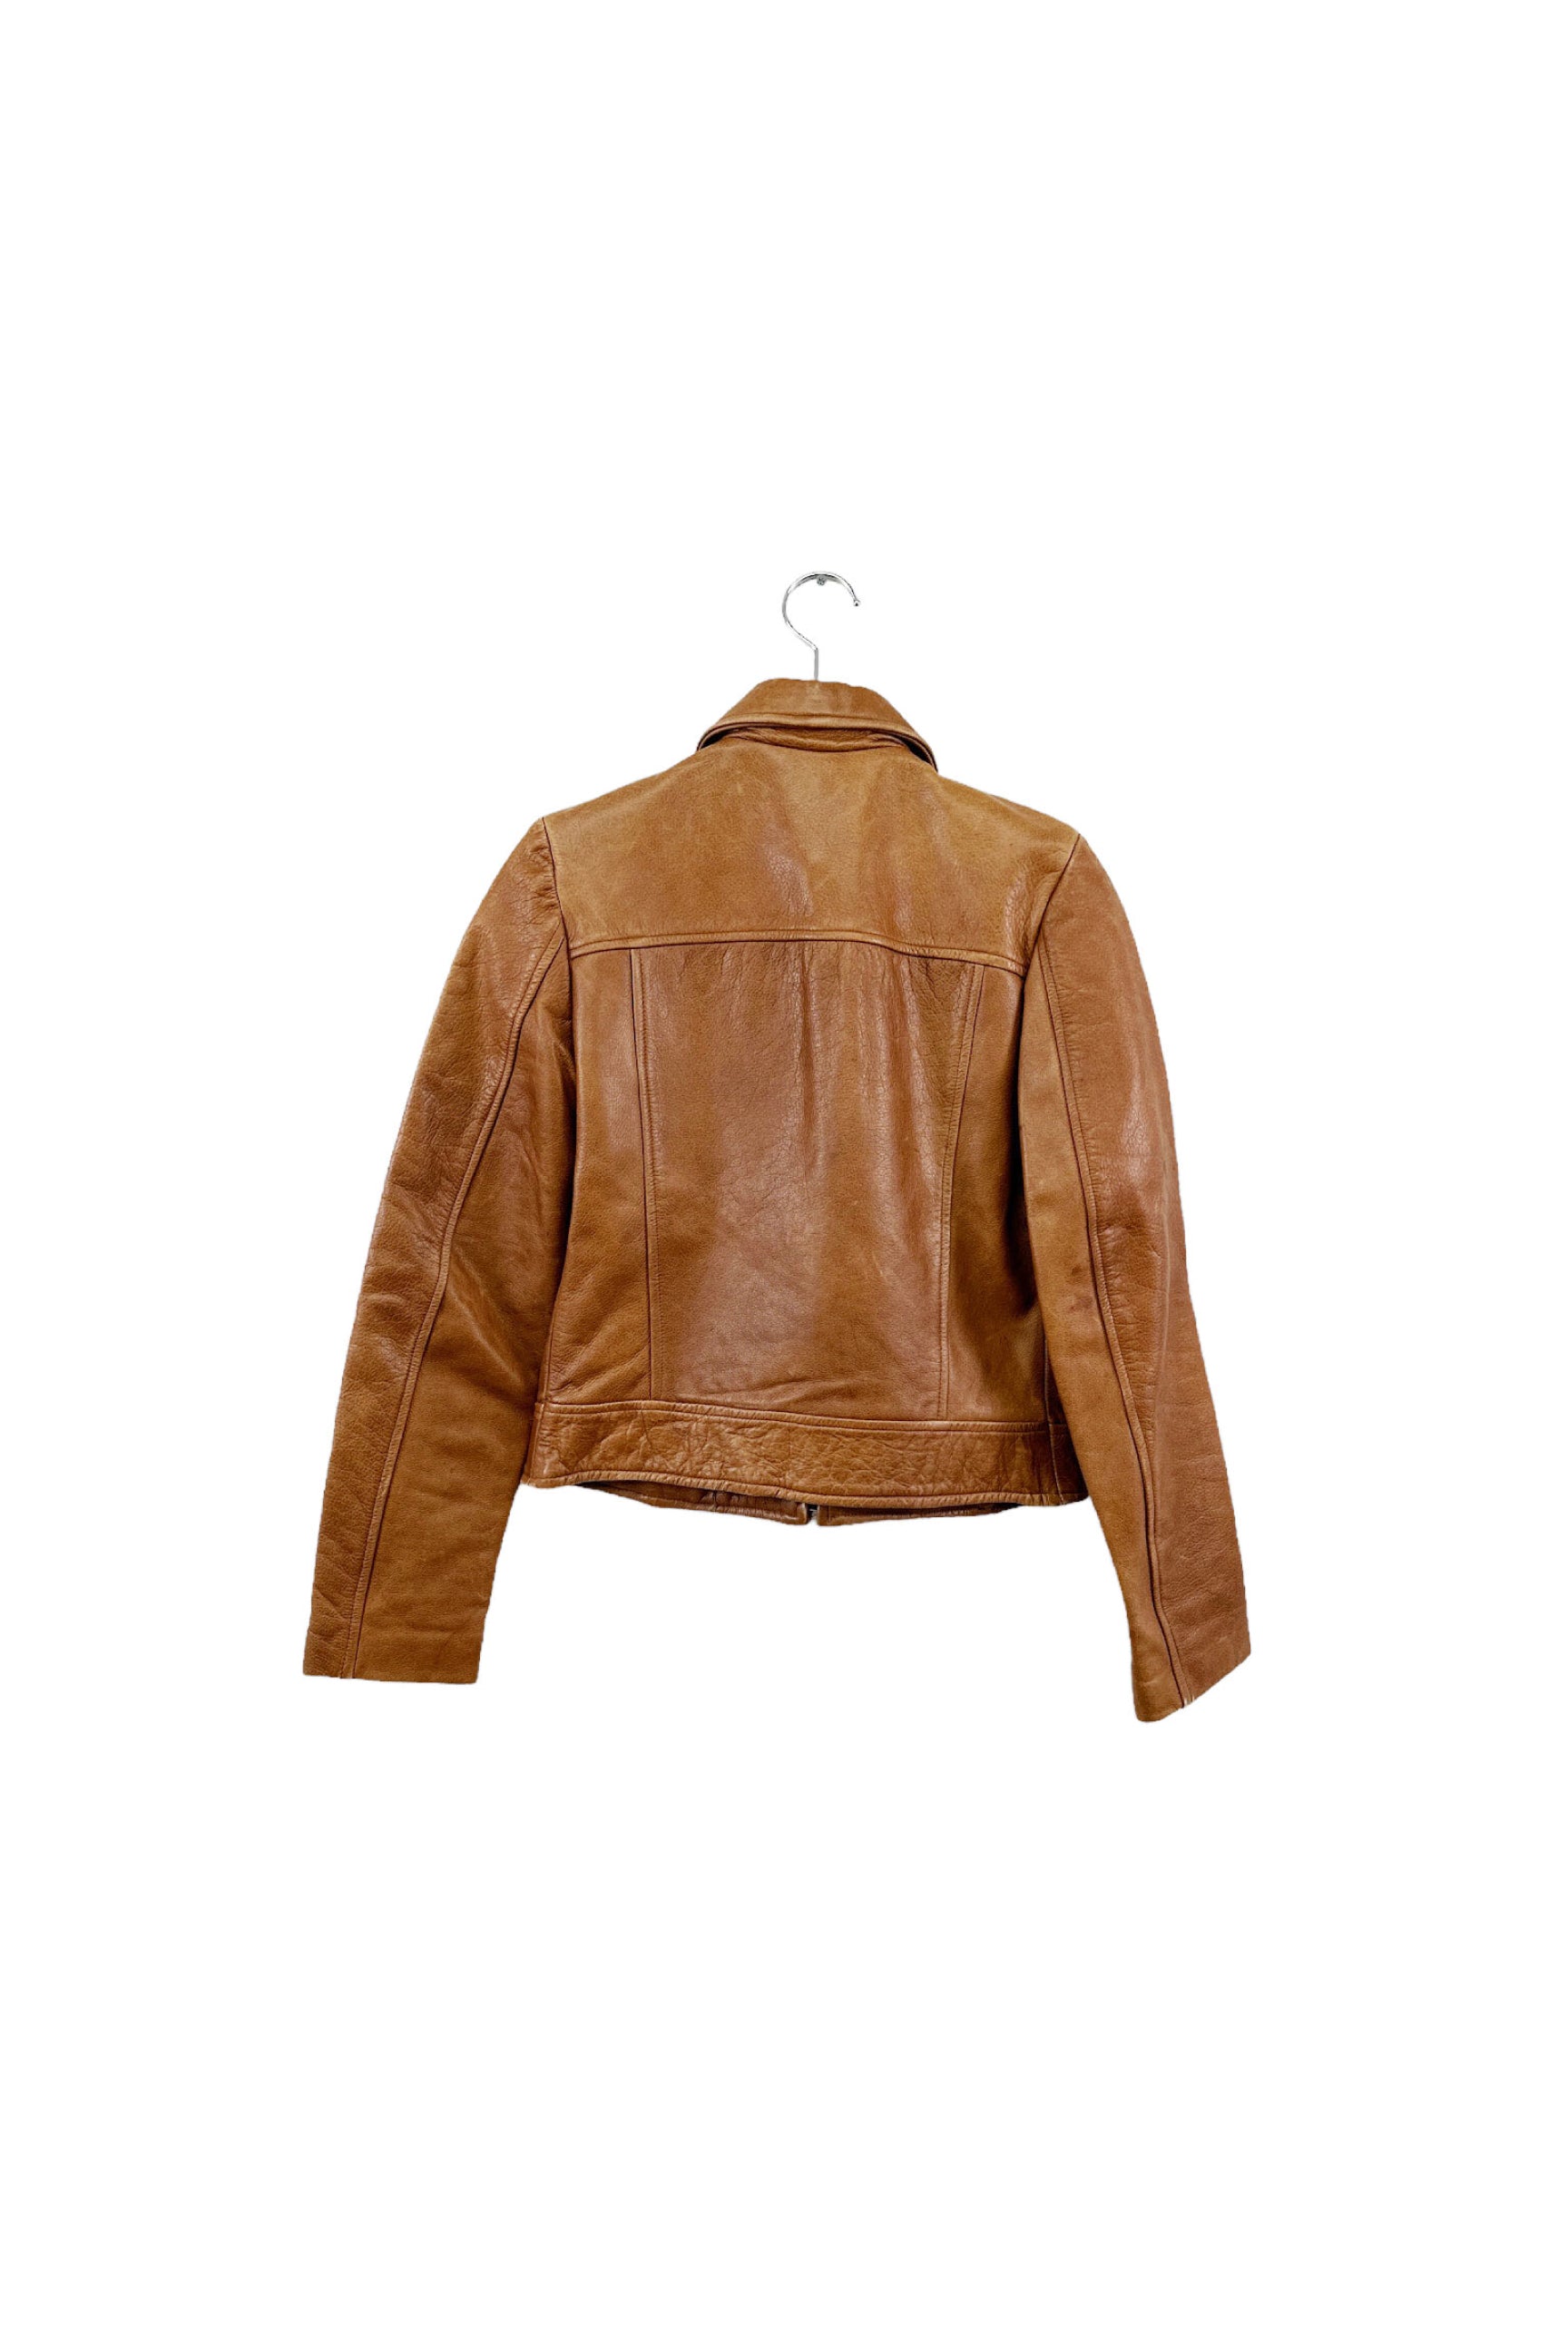 Made in FRANCE VENT COUVERT leather jacket